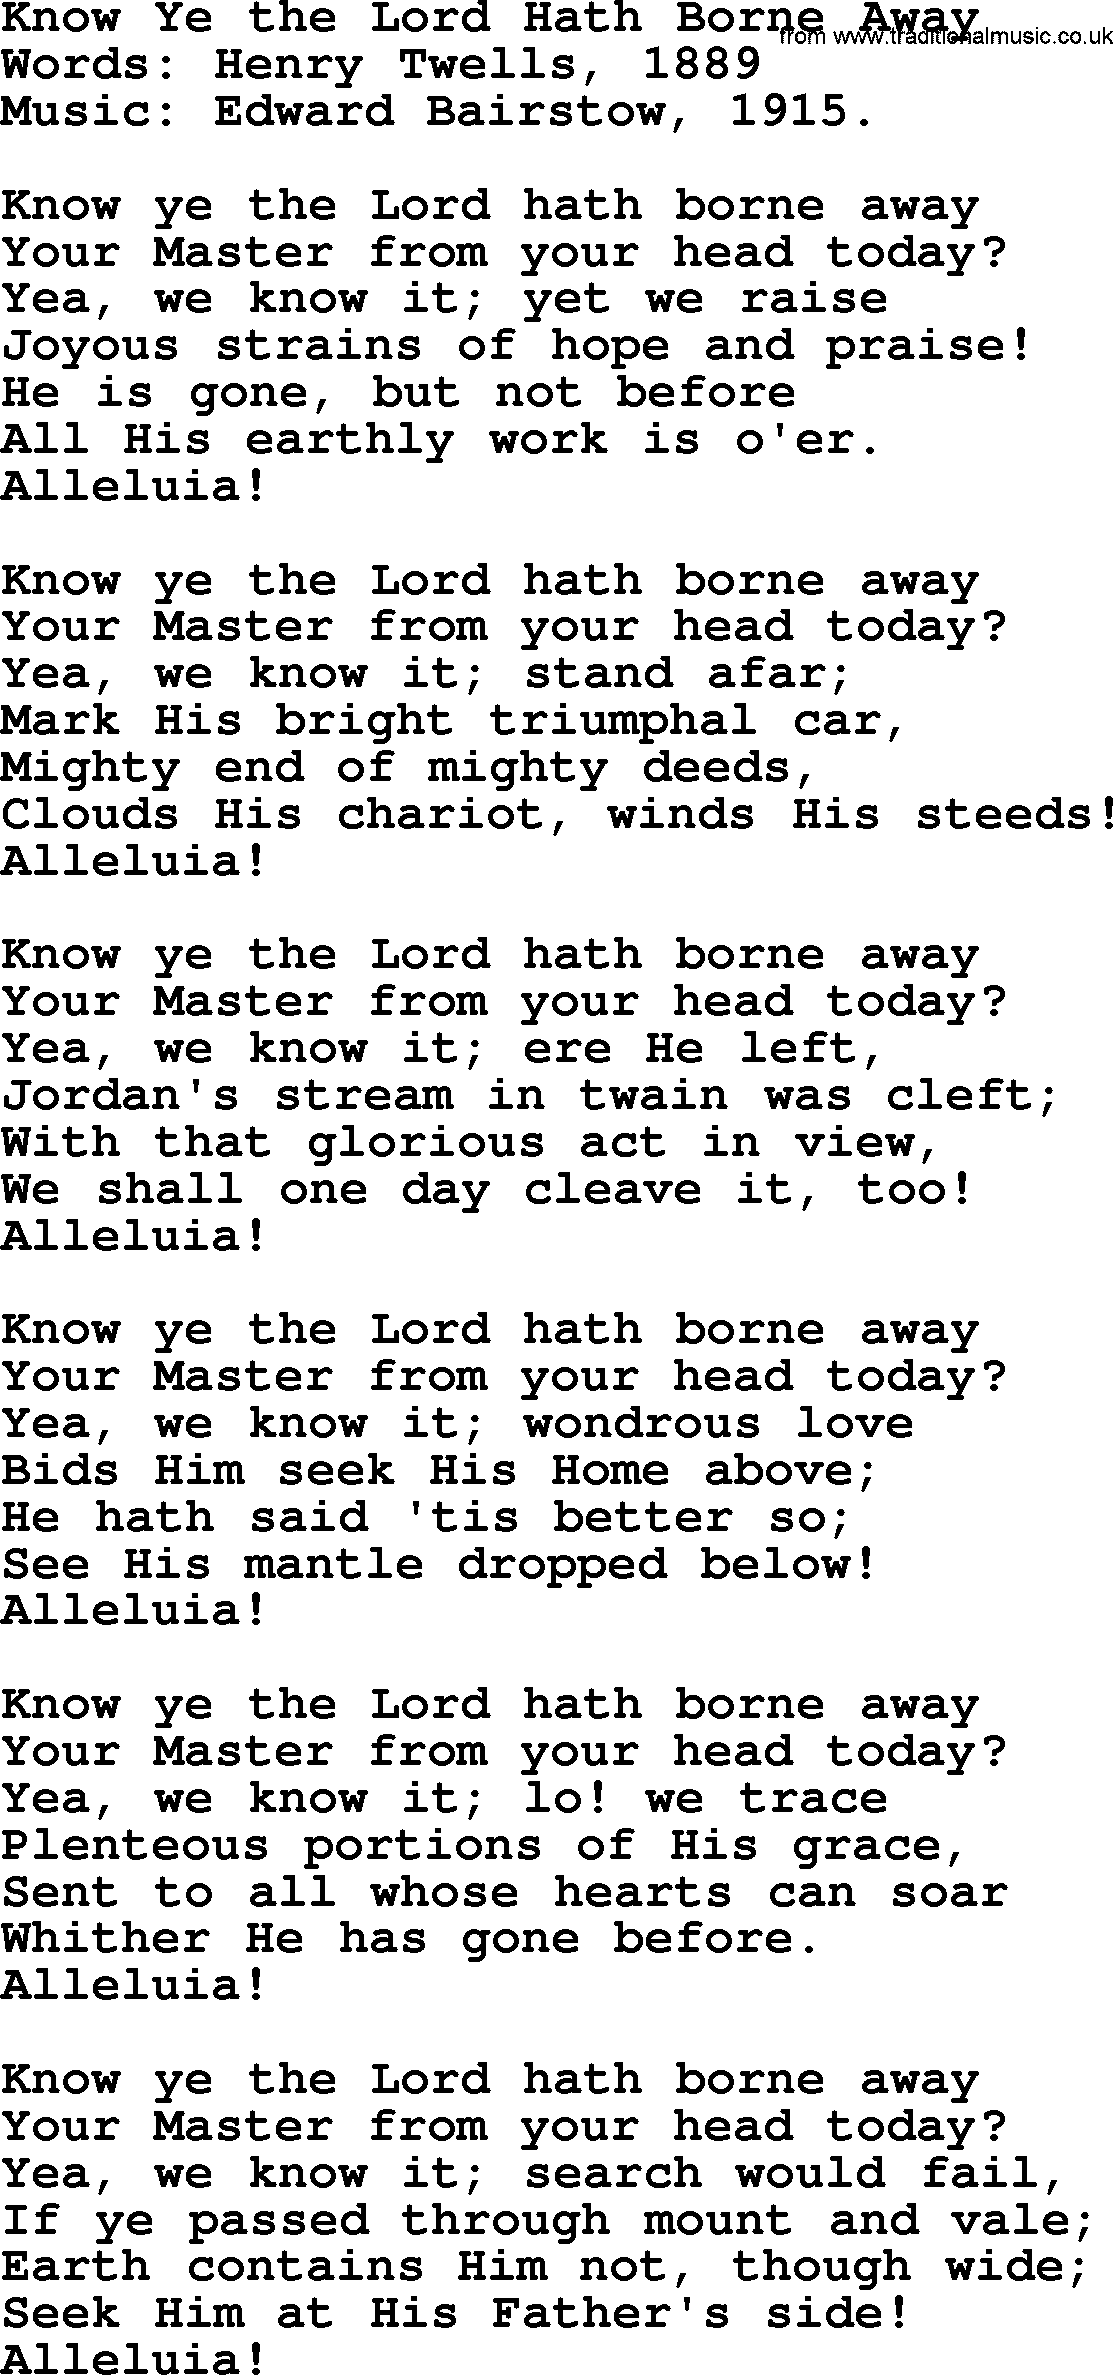 Ascensiontide Hynms collection, Hymn: Know Ye The Lord Hath Borne Away, lyrics and PDF